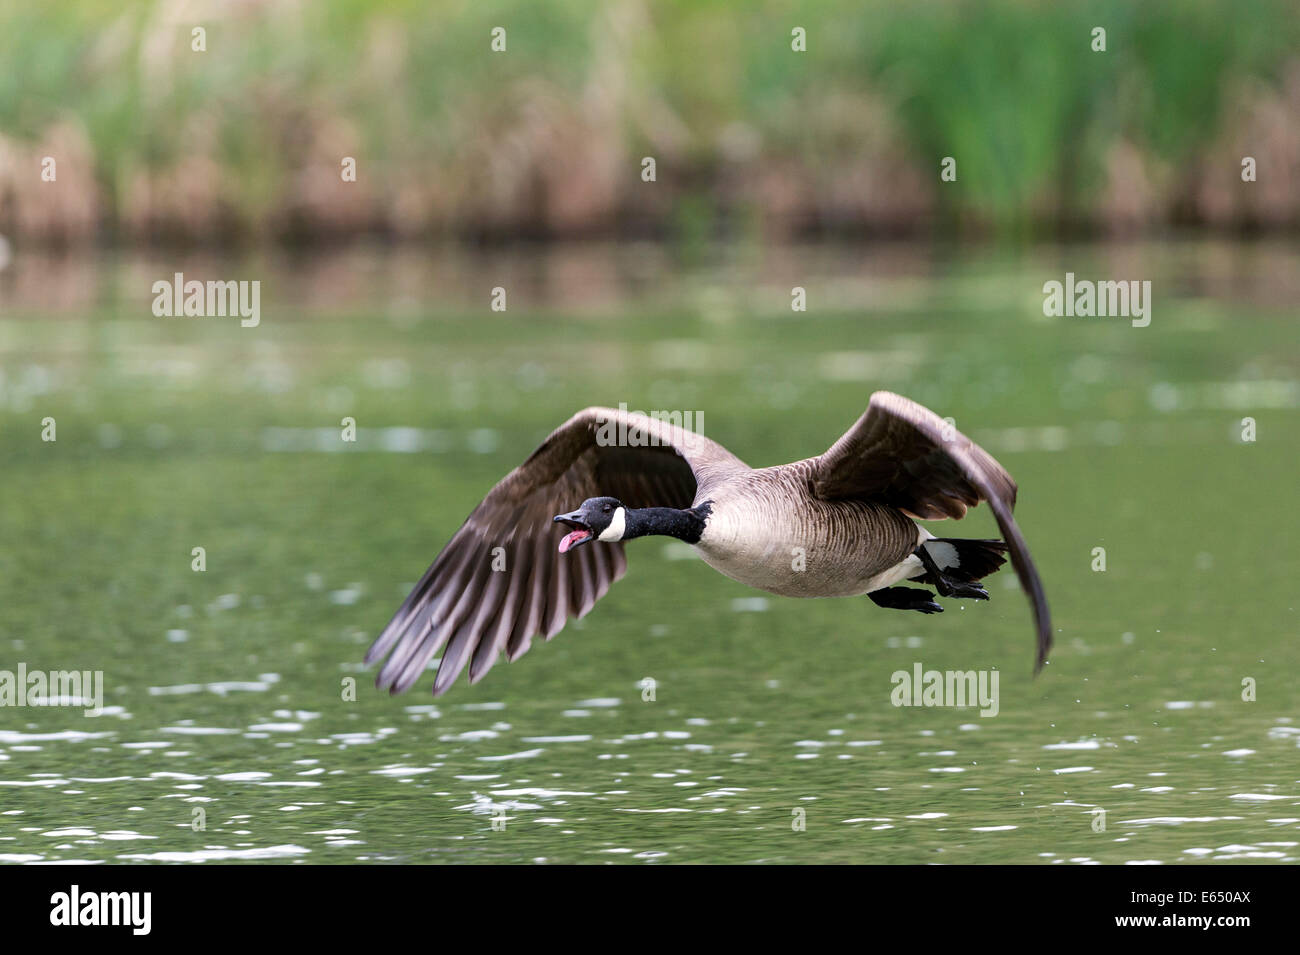 Canada Goose Flying High Resolution Stock Photography and Images - Alamy